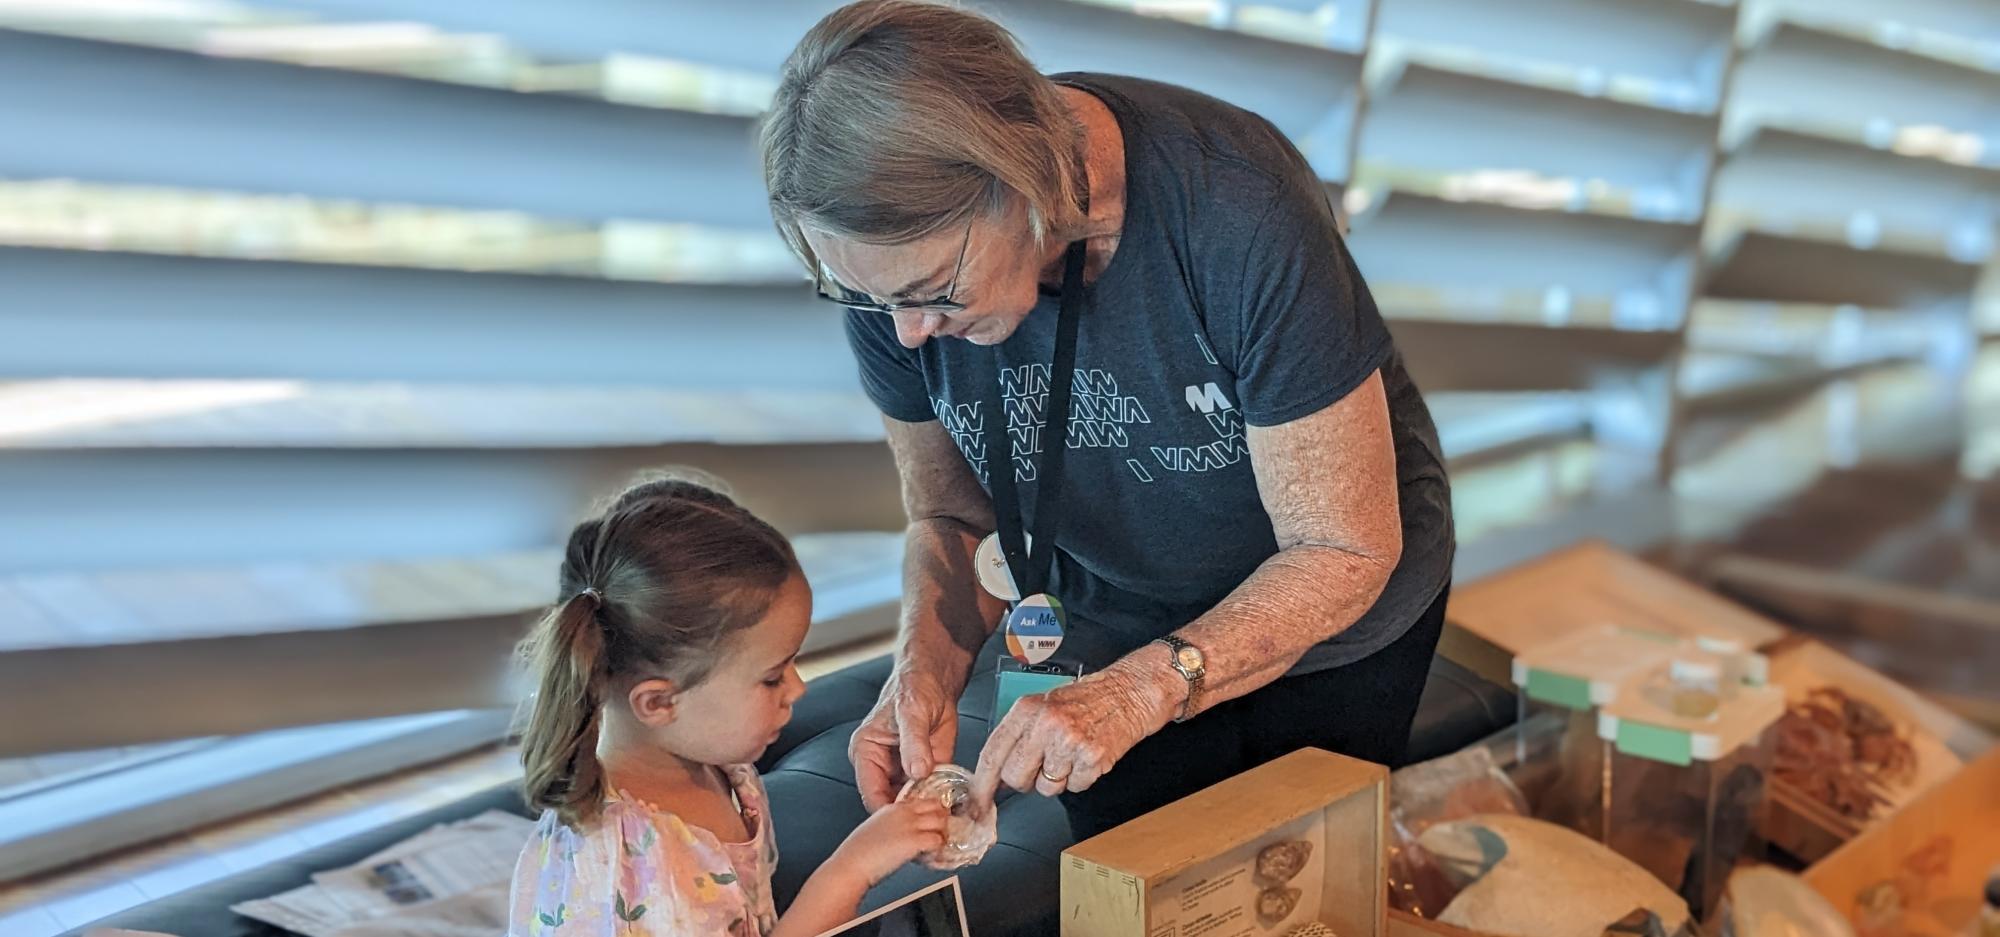 A mature female volunteer wearing a WA Museum tee shirt is looking through some aquatic zoology specimens with a young girl. The volunteer is holding a pearlescent shell, which the girl is examining with an interested expression.